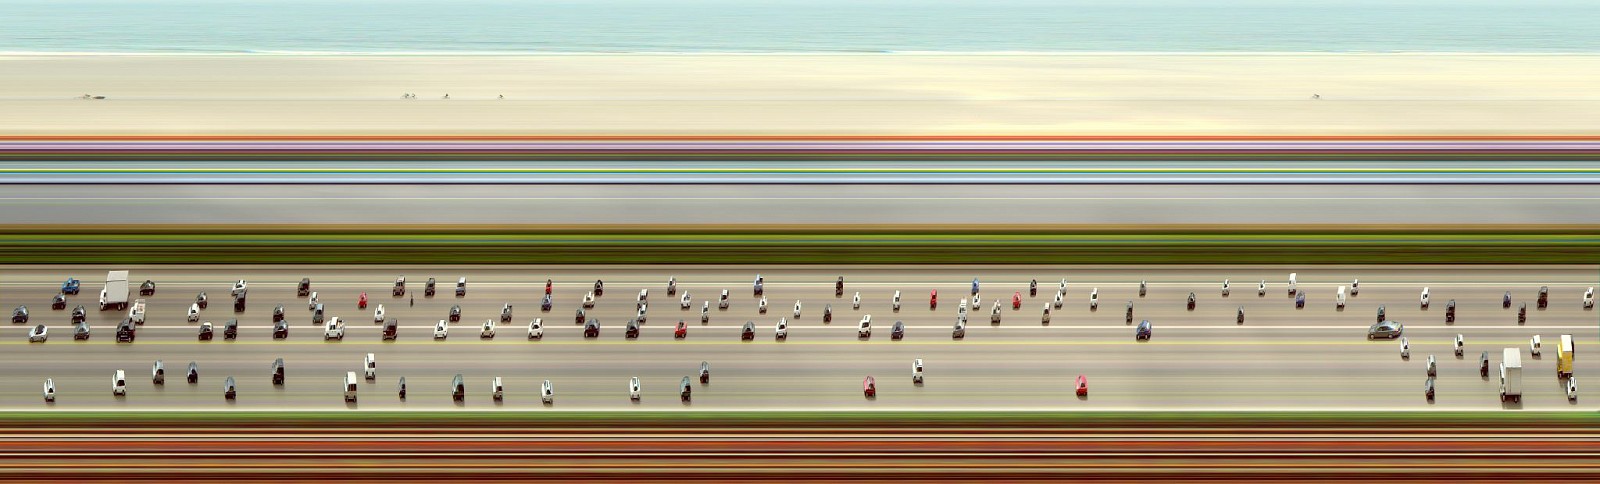 Jay Mark Johnson, PACIFIC COAST HIGHWAY 6, 2007 CA
archival pigment on paper, mounted on aluminum, 40 x 132 in. (101.6 x 335.3 cm)